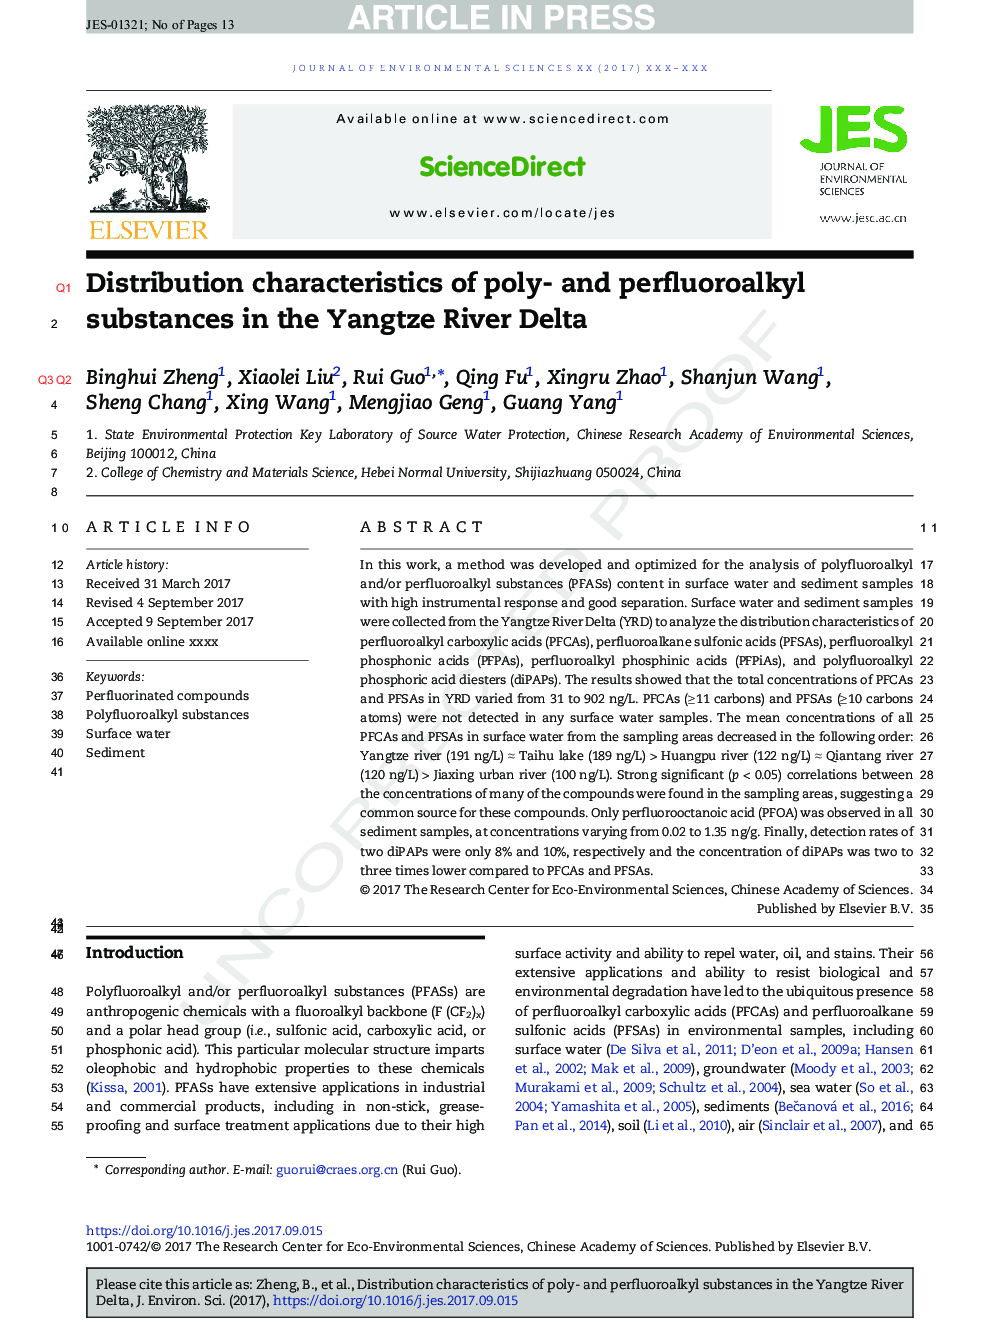 Distribution characteristics of poly- and perfluoroalkyl substances in the Yangtze River Delta